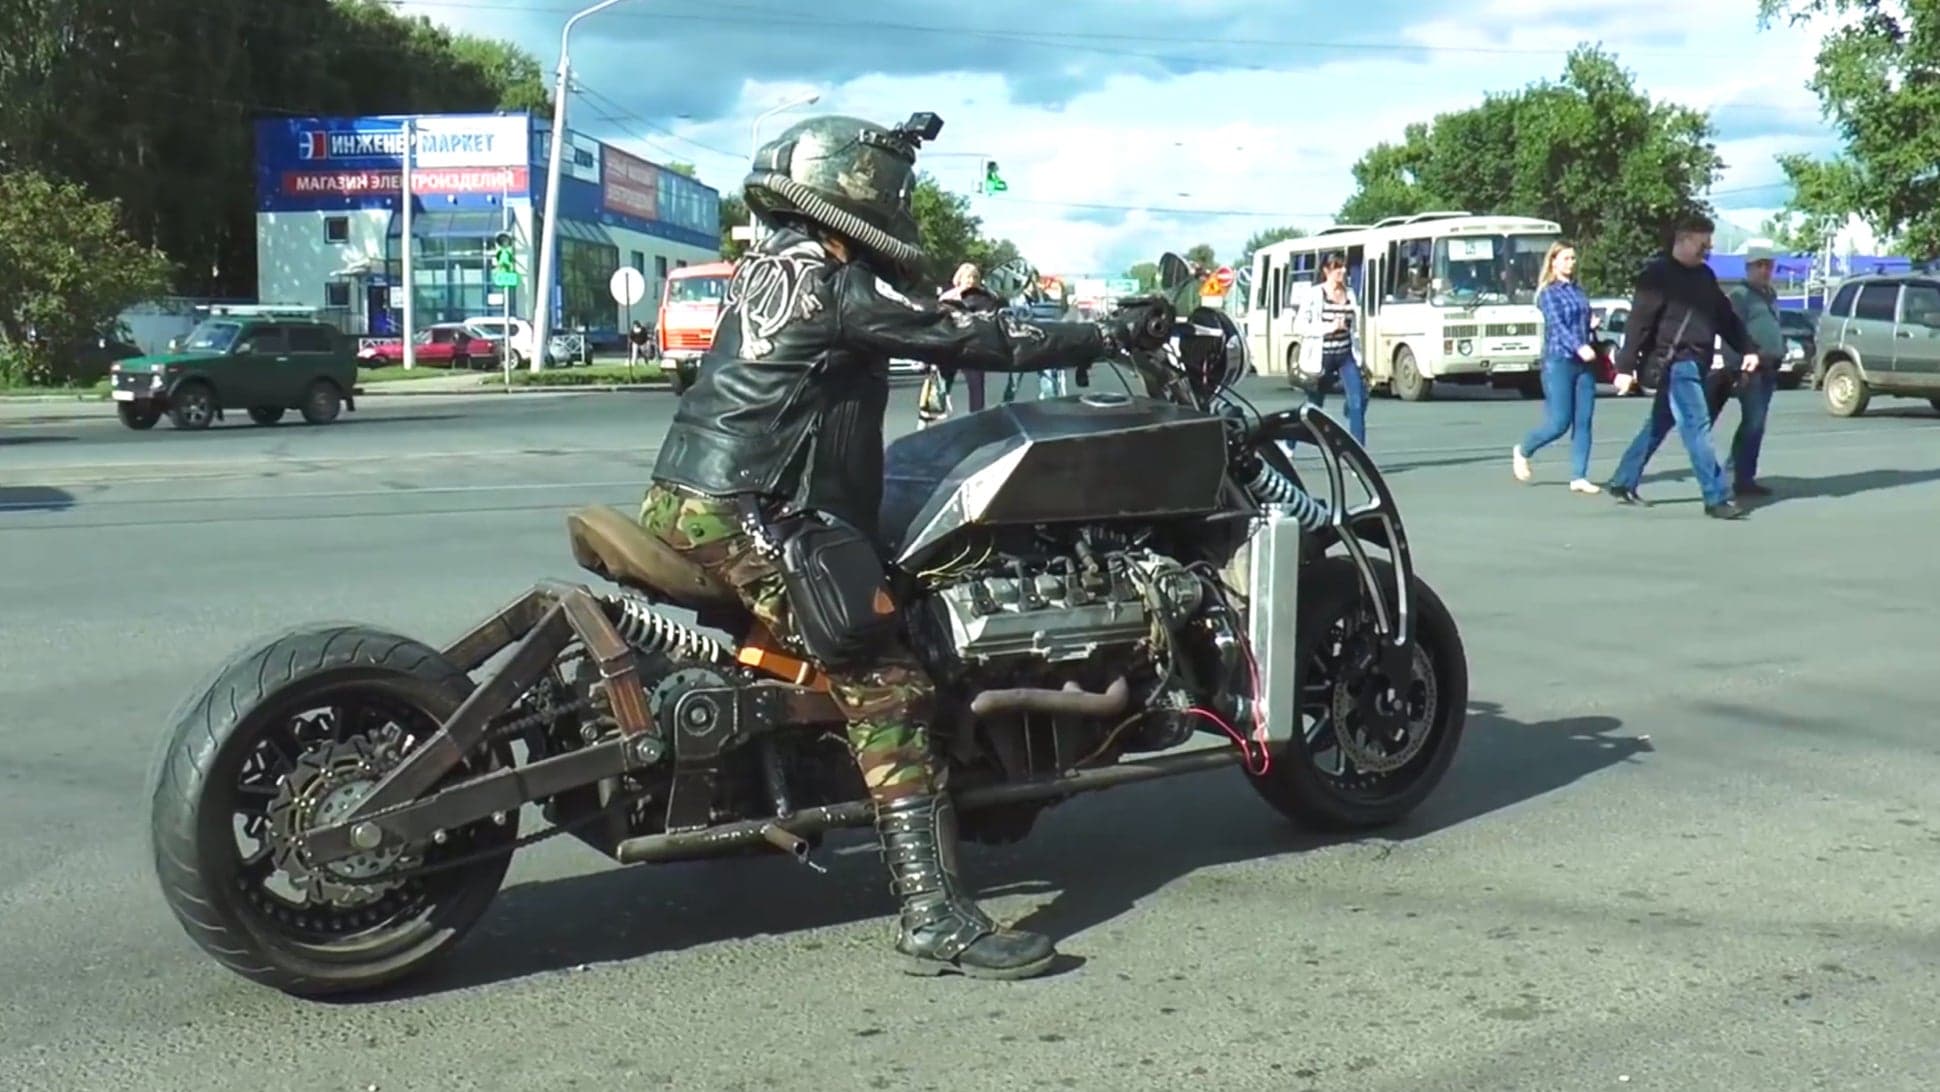 Ride Into the Wasteland in Style With This Insane Lexus V8-Powered Motorcycle